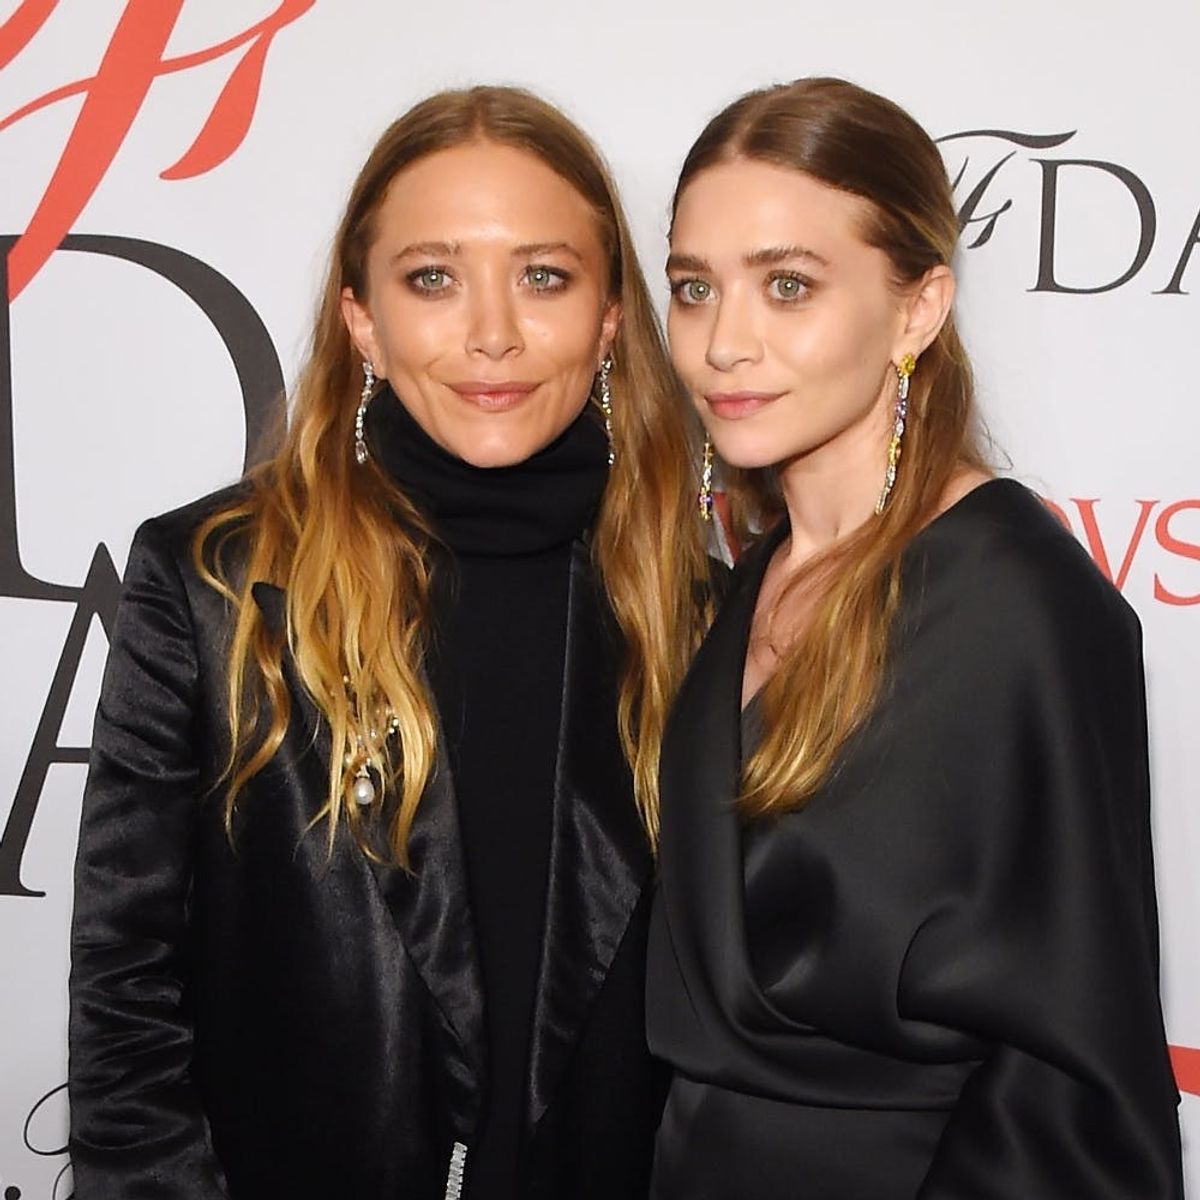 Ashley Olsen’s Reported New Romance Is Another May/December Relationship